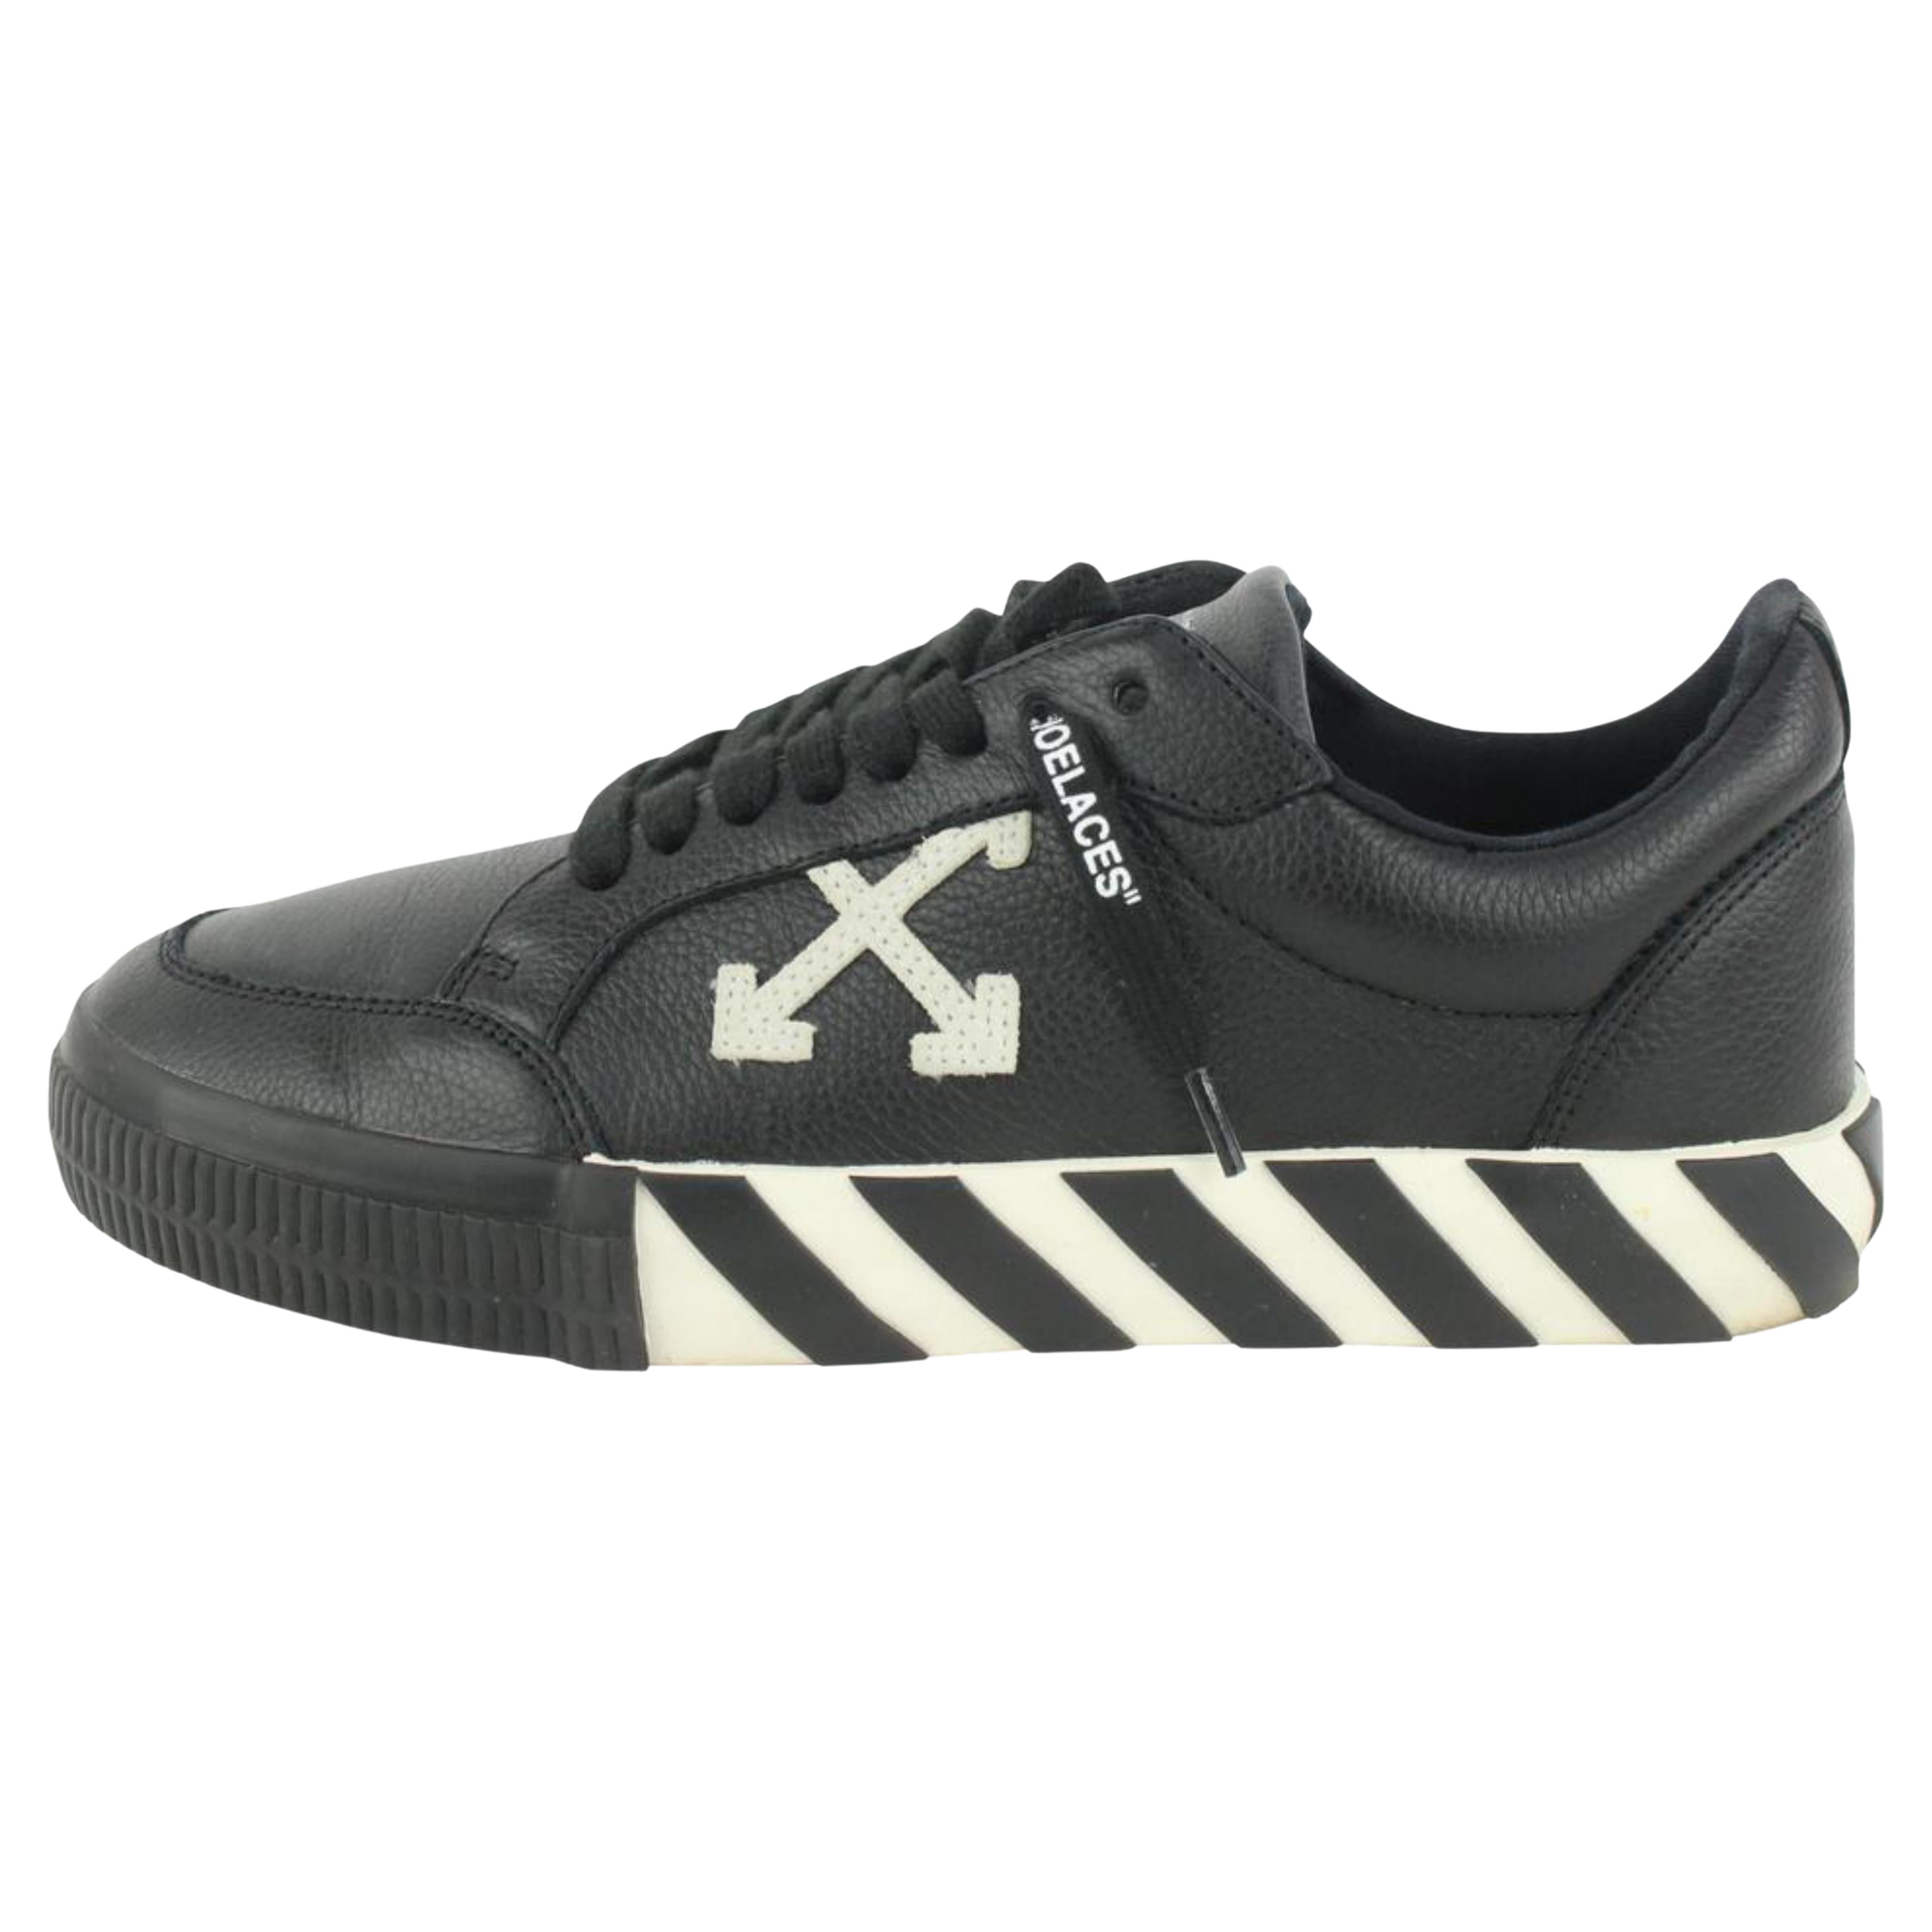 Off-White Men Do You Cheer" Black Low Sneakers 1029of44